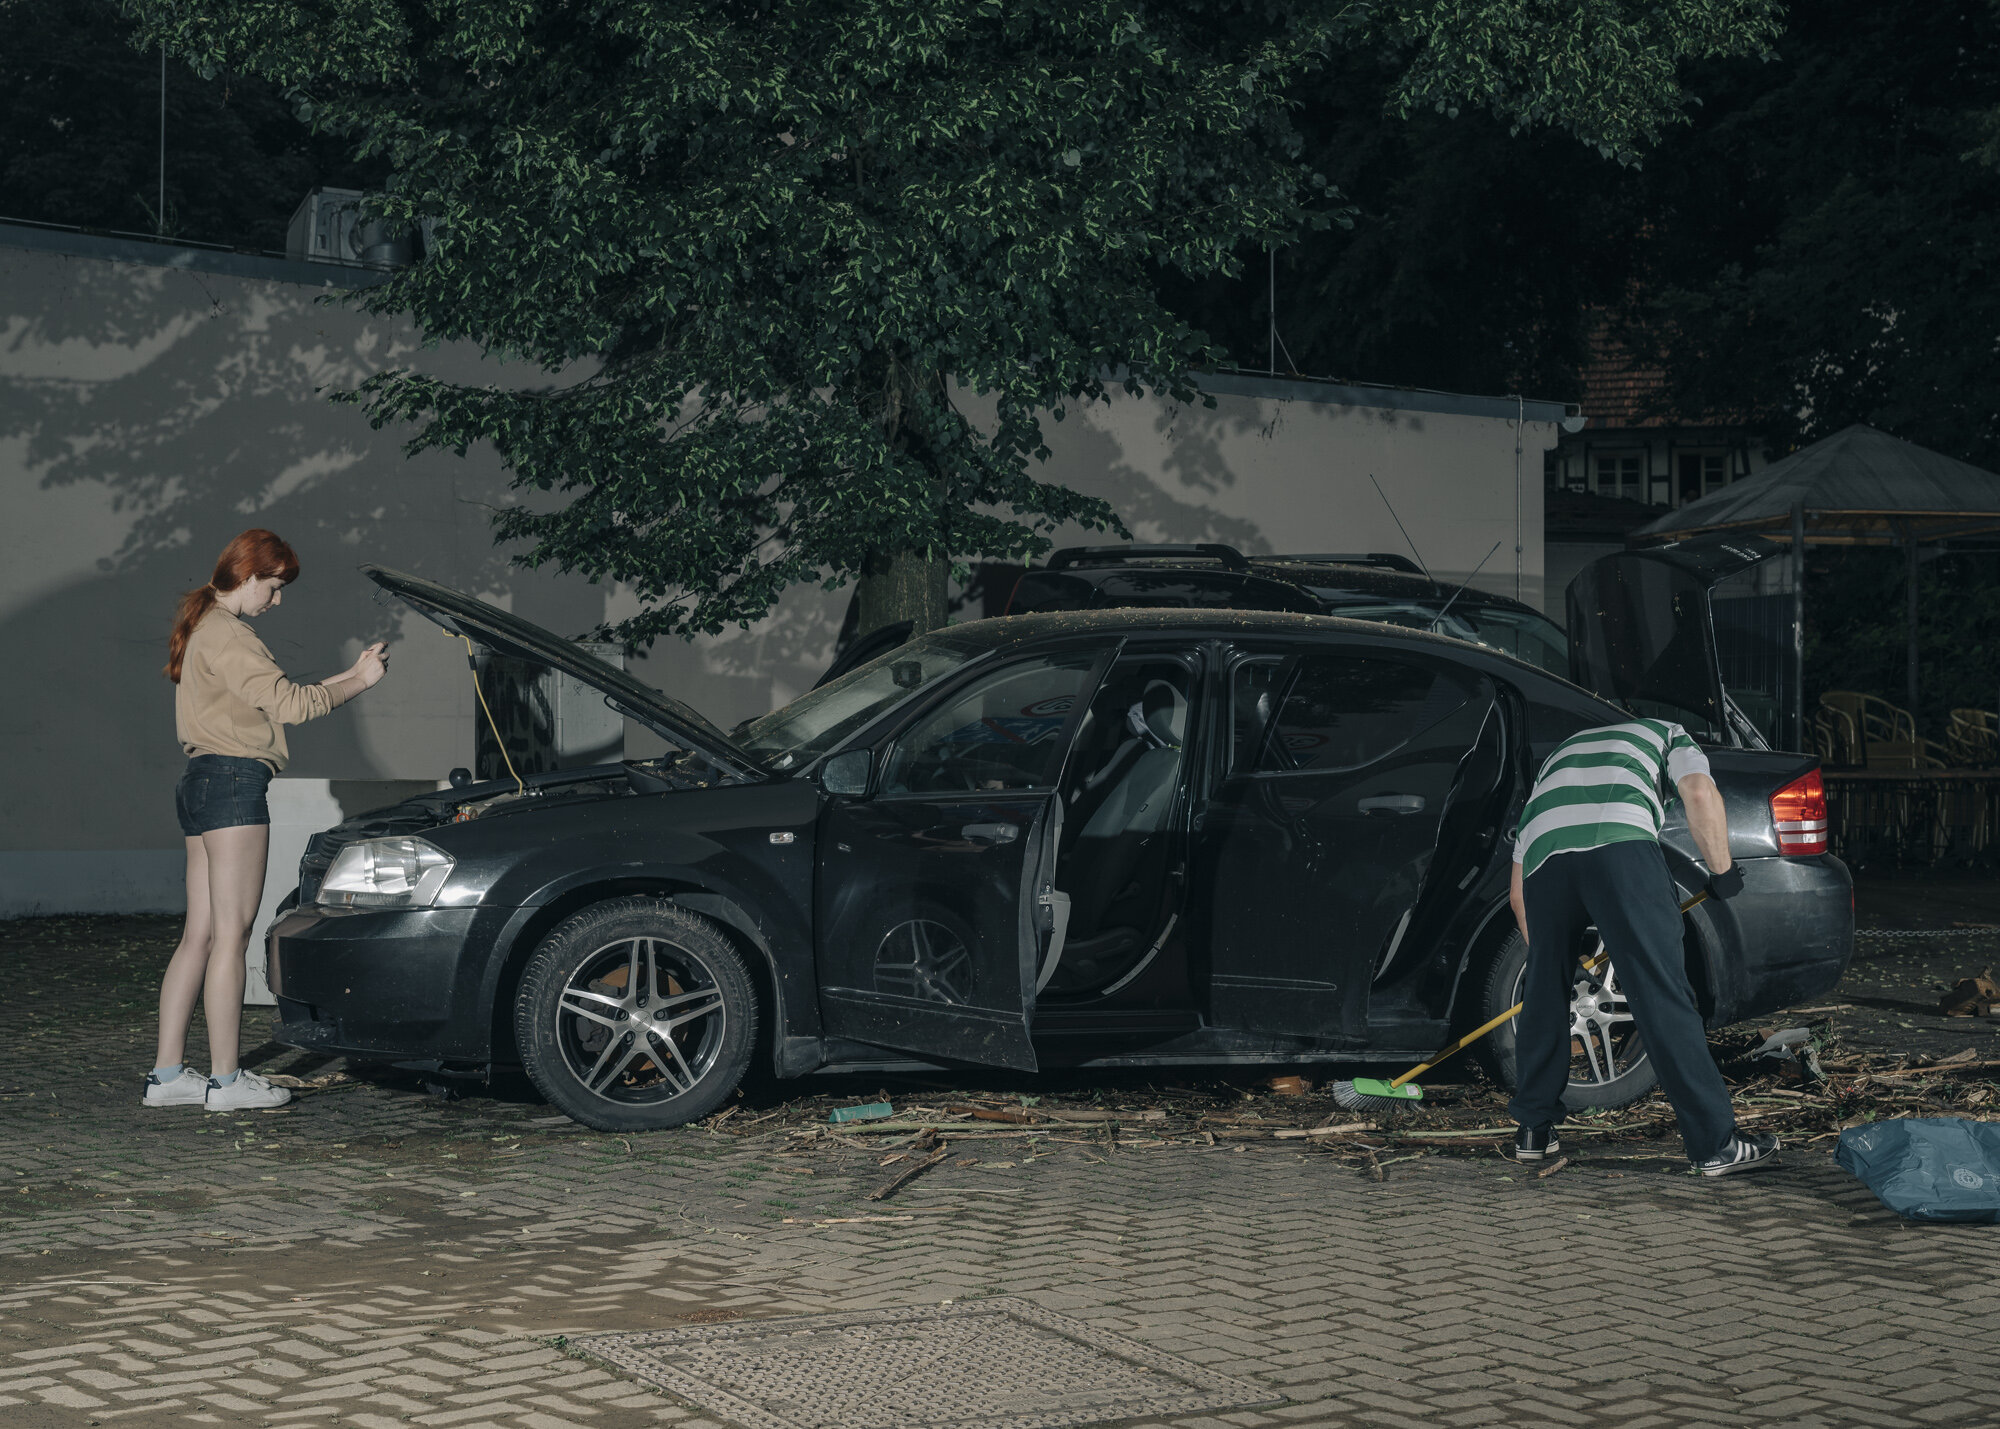  A couple from Hagen inspects their car, which was damaged by the flood. Since they do not have comprehensive insurance, they have to pay for all the damage to their car themselves. 